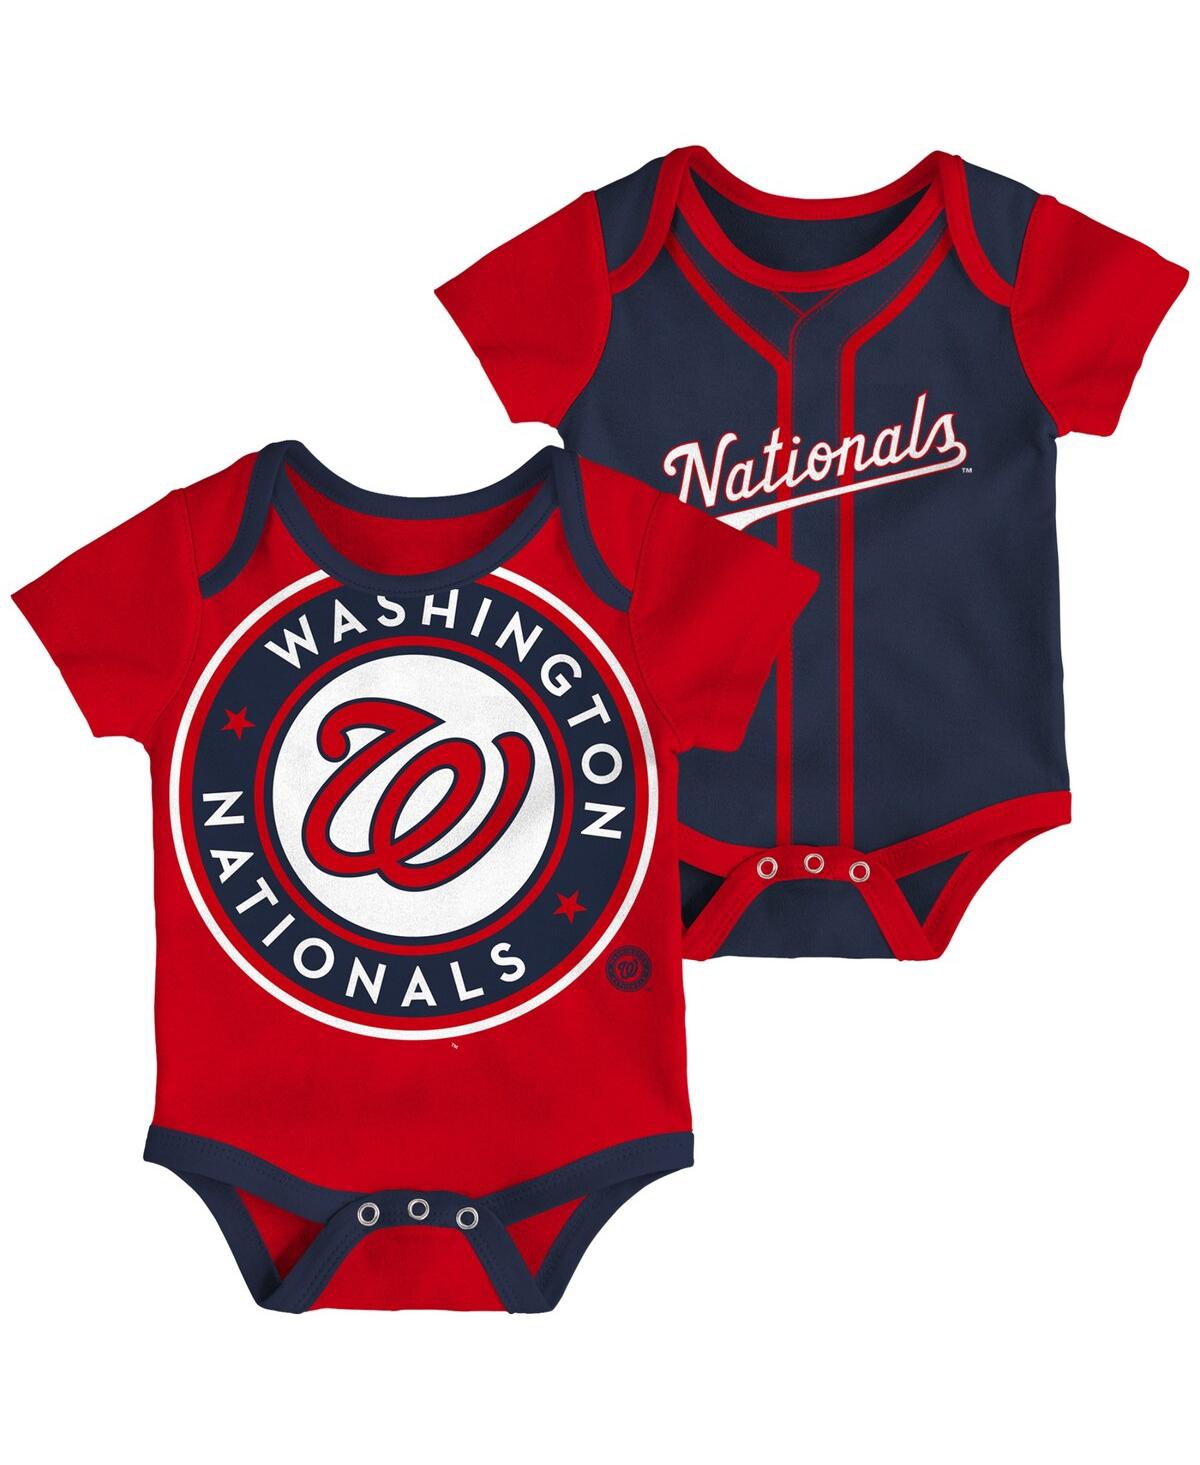 Outerstuff Babies' Infant Boys And Girls Red, Navy Washington Nationals Double 2-pack Bodysuit Set In Red,navy